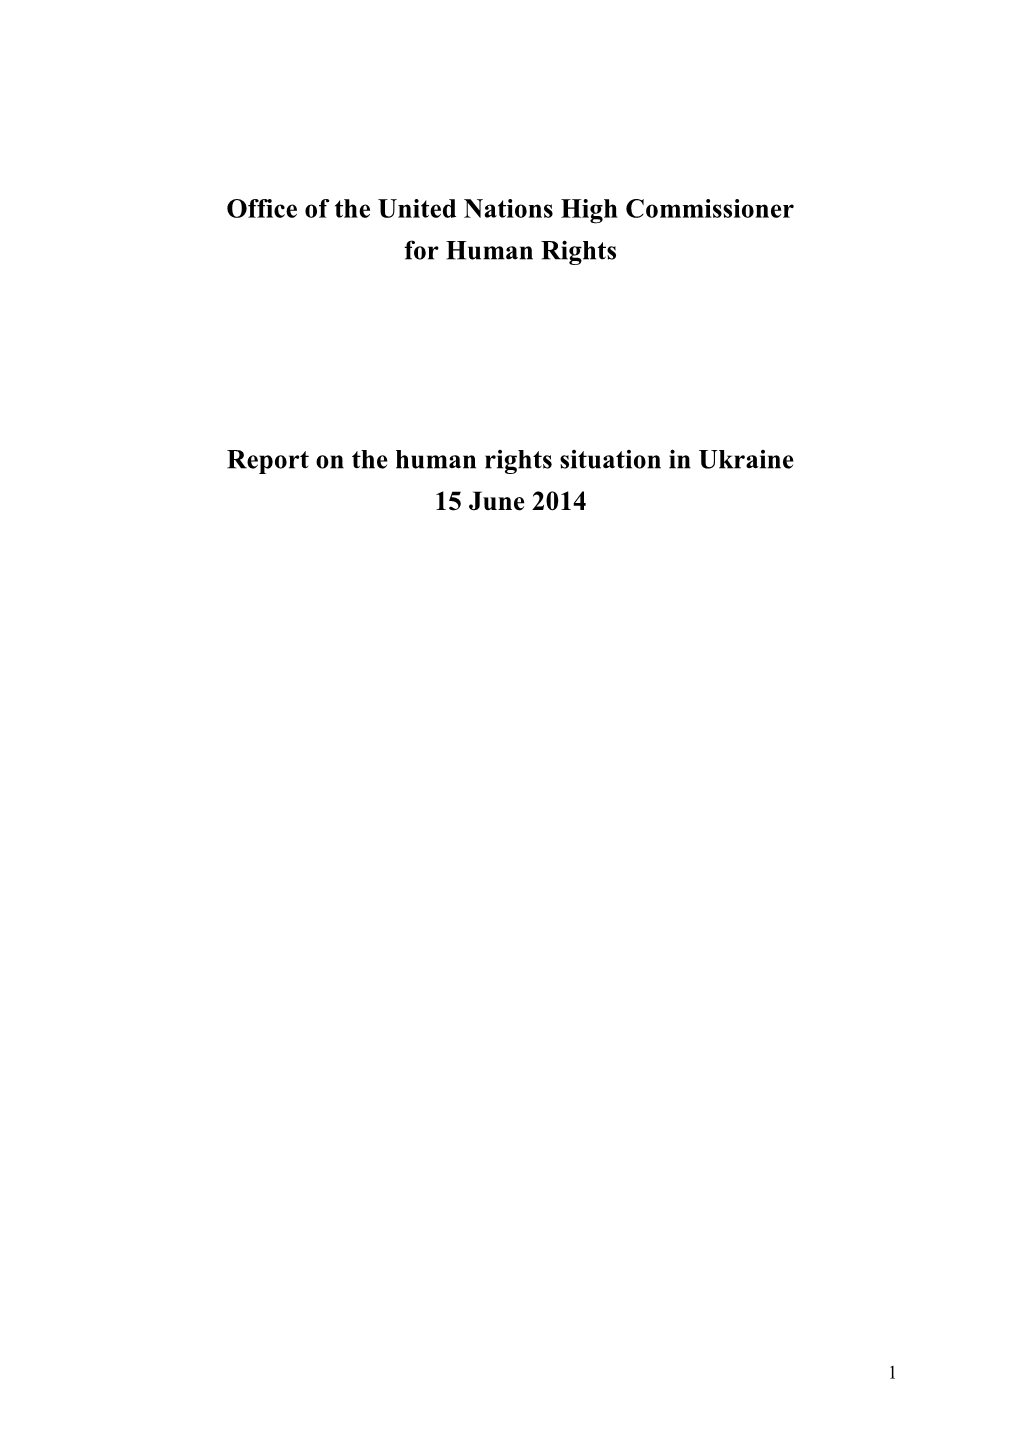 Report on the Human Rights Situation in Ukraine 15 June 2014